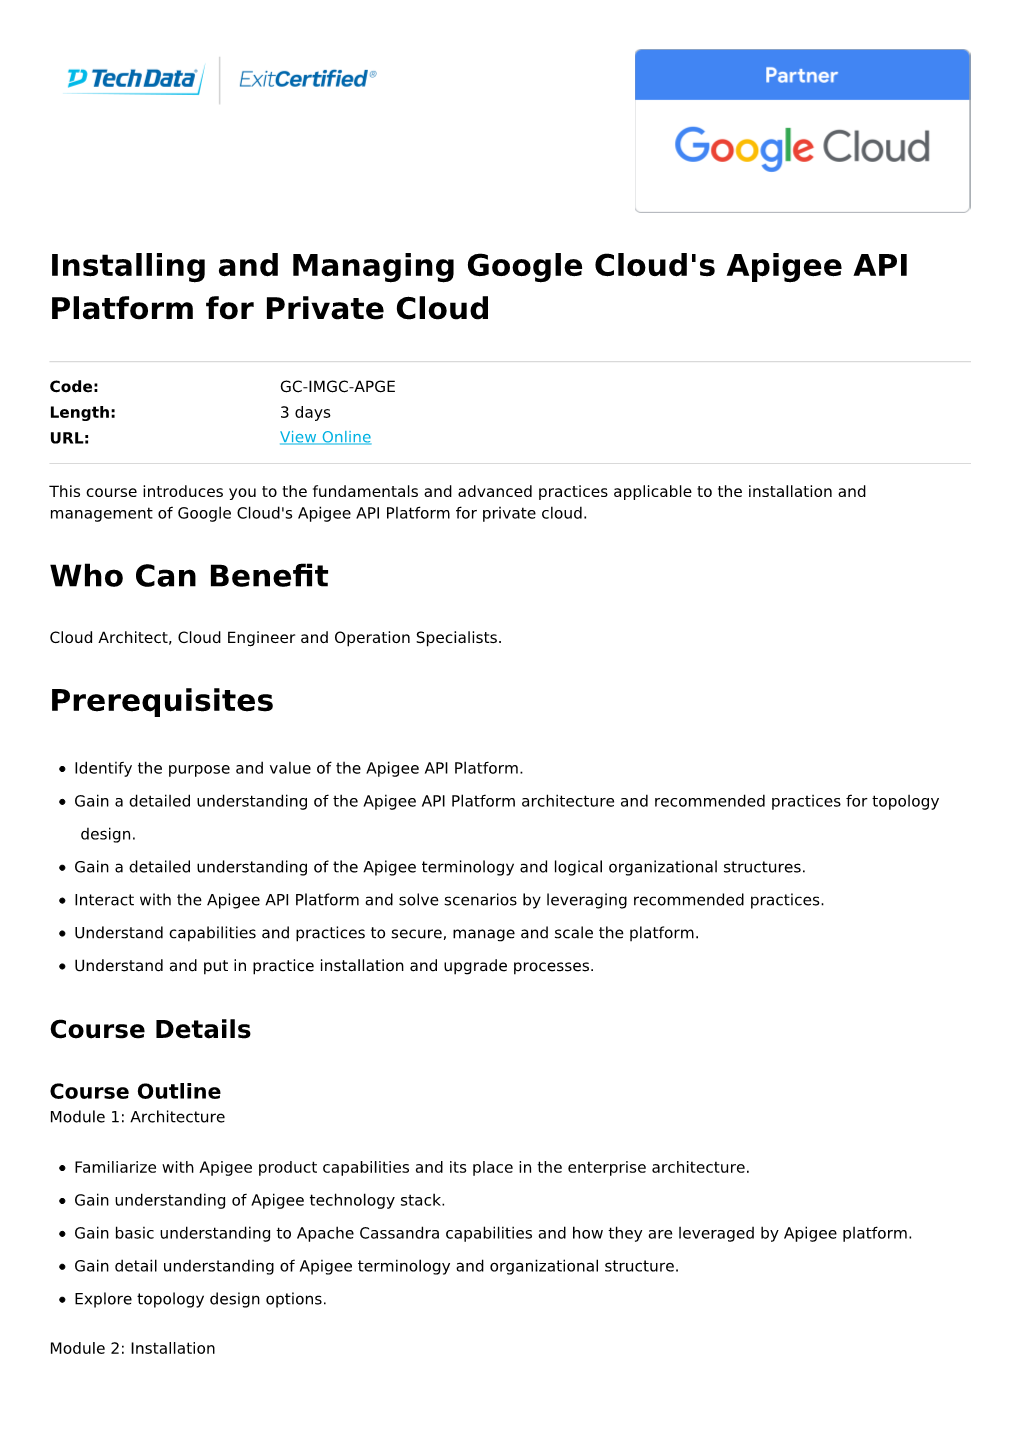 Installing and Managing Google Cloud's Apigee API Platform for Private Cloud